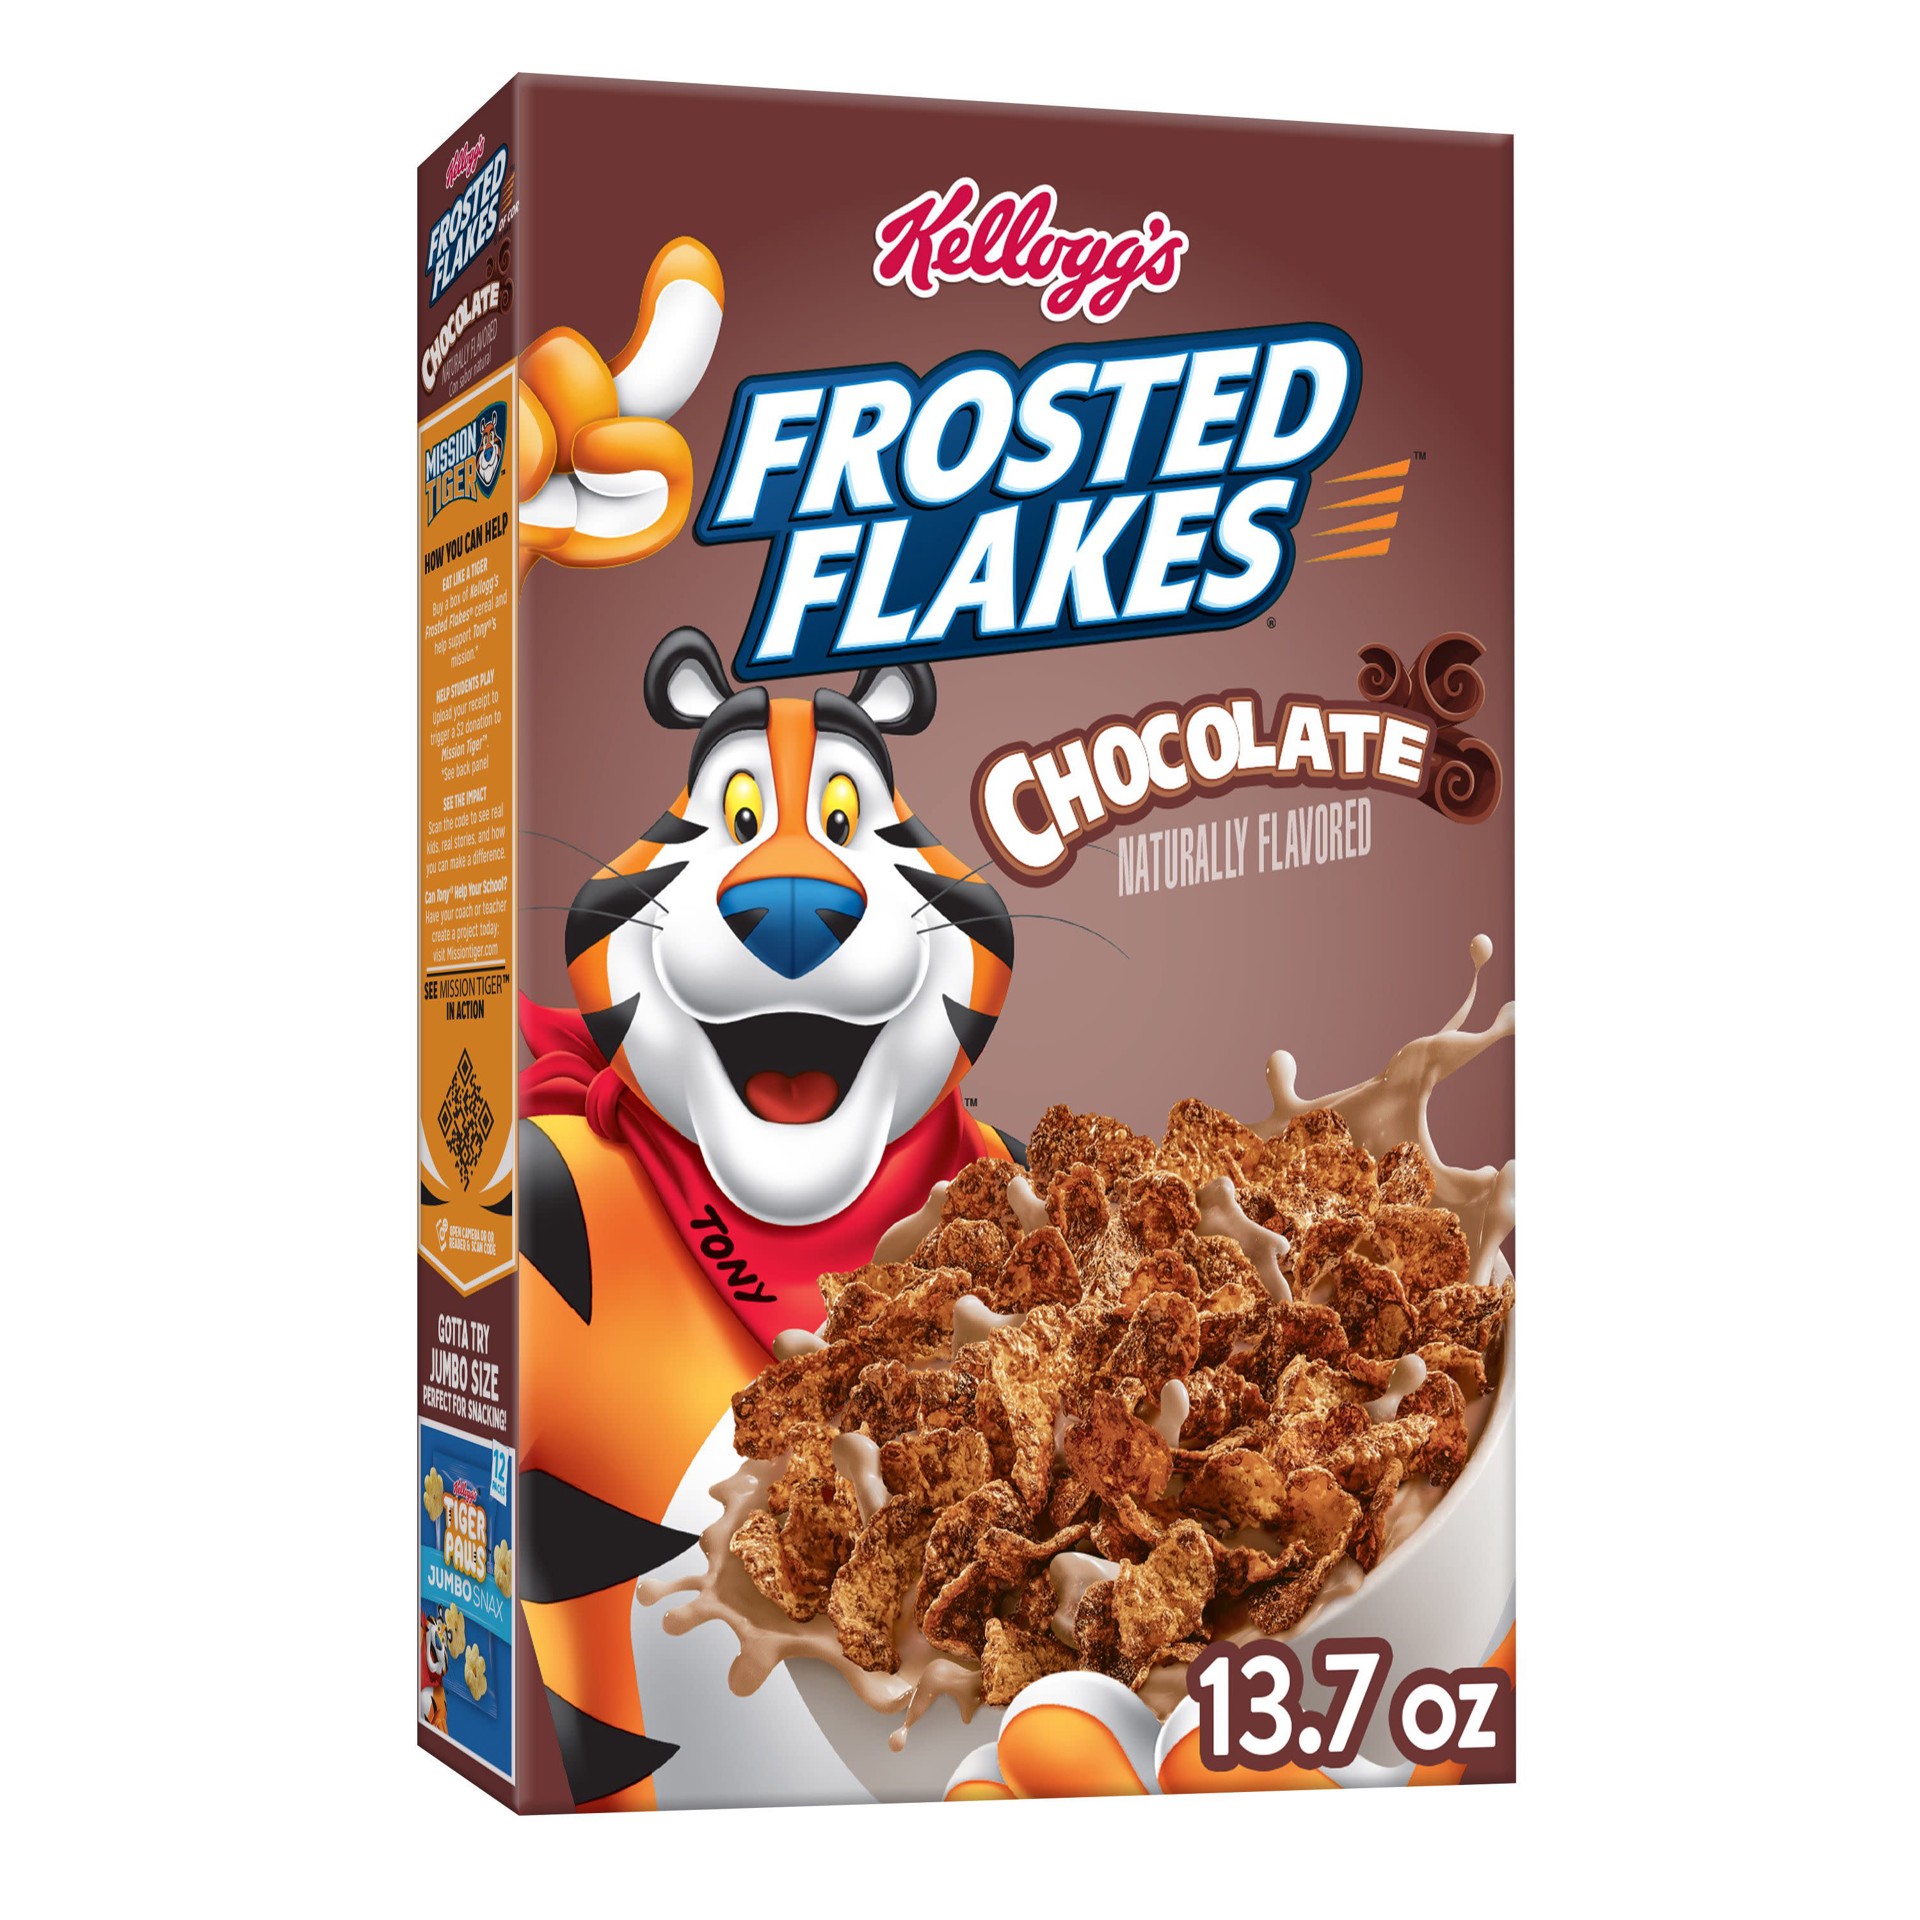 slide 1 of 8, Frosted Flakes Kellogg's Frosted Flakes Cold Breakfast Cereal, 8 Vitamins and Minerals, Kids Snacks, Chocolate, 13.7oz Box, 1 Box, 13.7 oz